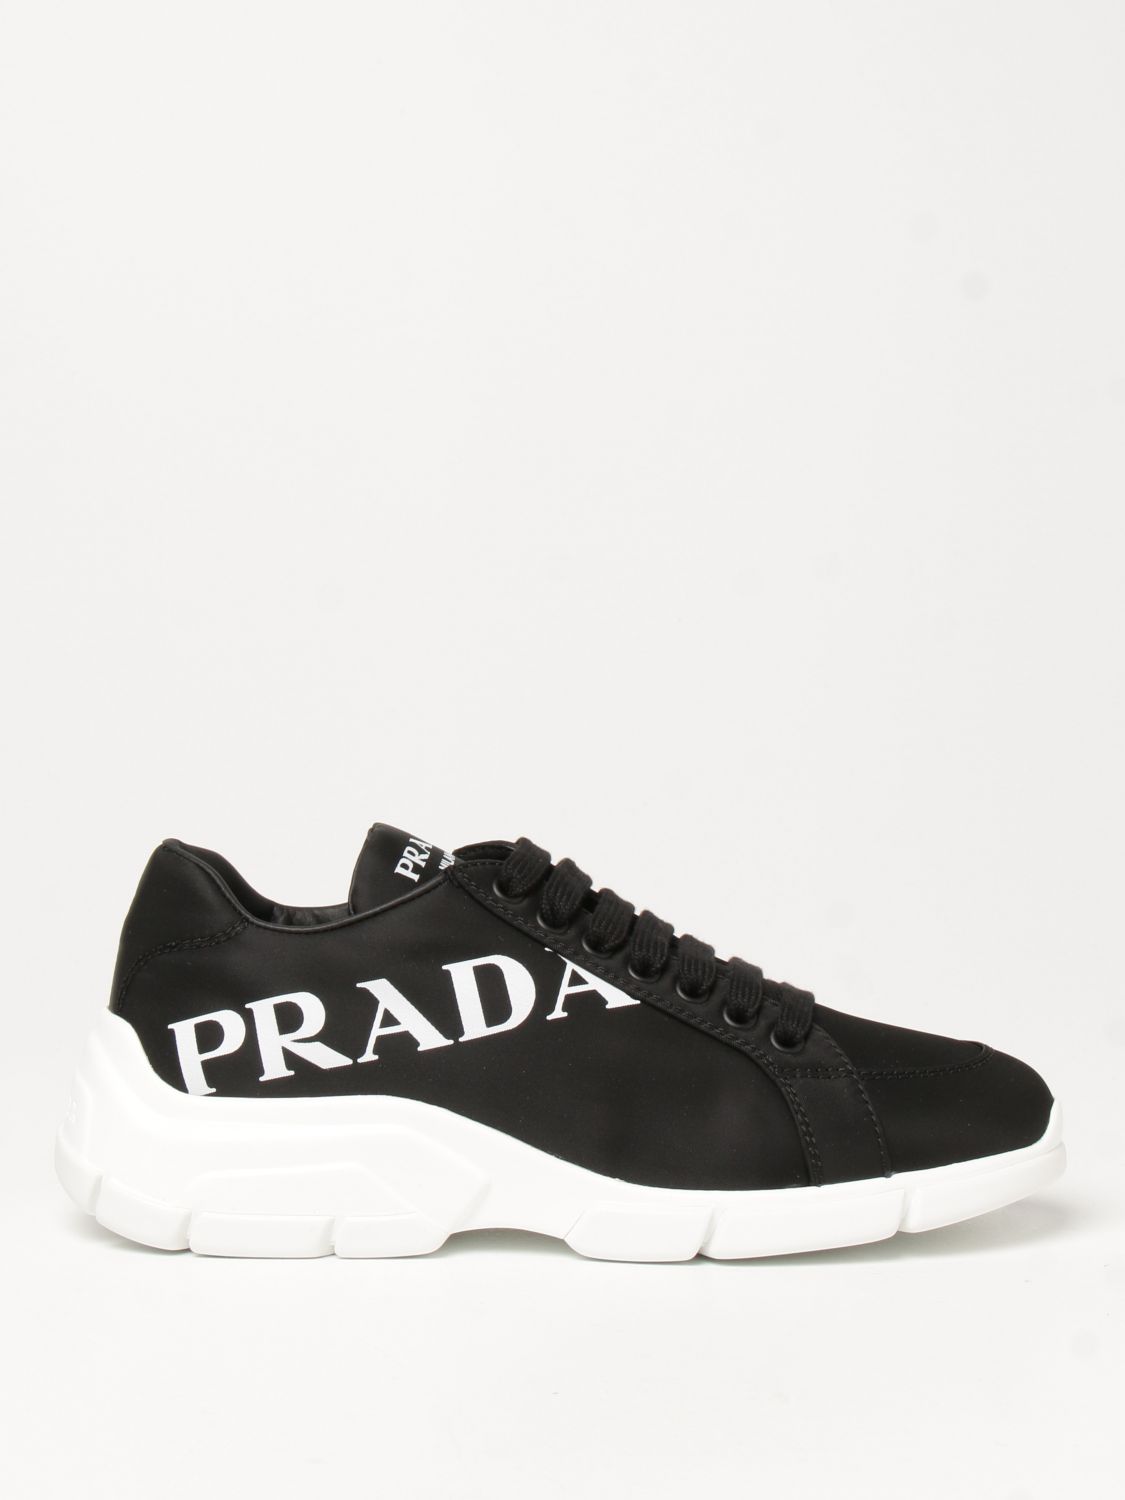 Diplomatic issues Betsy Trotwood oil Sneakers Prada Women La France, SAVE 57% - lutheranems.com